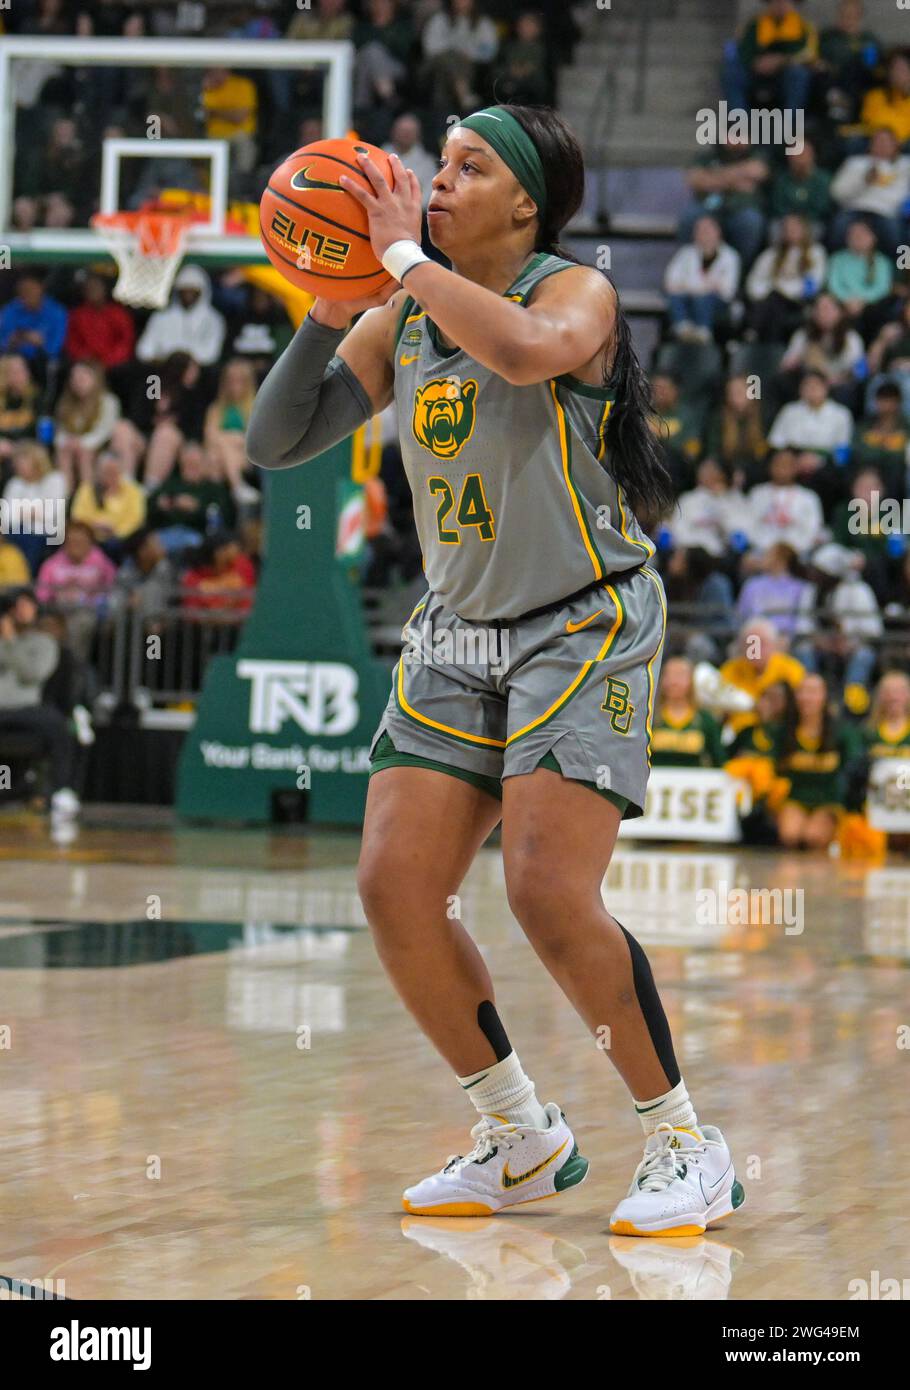 February 1 2024: Baylor Lady Bears guard Sarah Andrews (24) shoots the ball during the 1st half of the NCAA Basketball game between the Texas Longhorns and Baylor Lady Bears at Foster Pavilion in Waco, Texas. Matthew Lynch/CSM (Credit Image: © Matthew Lynch/Cal Sport Media) Stock Photo